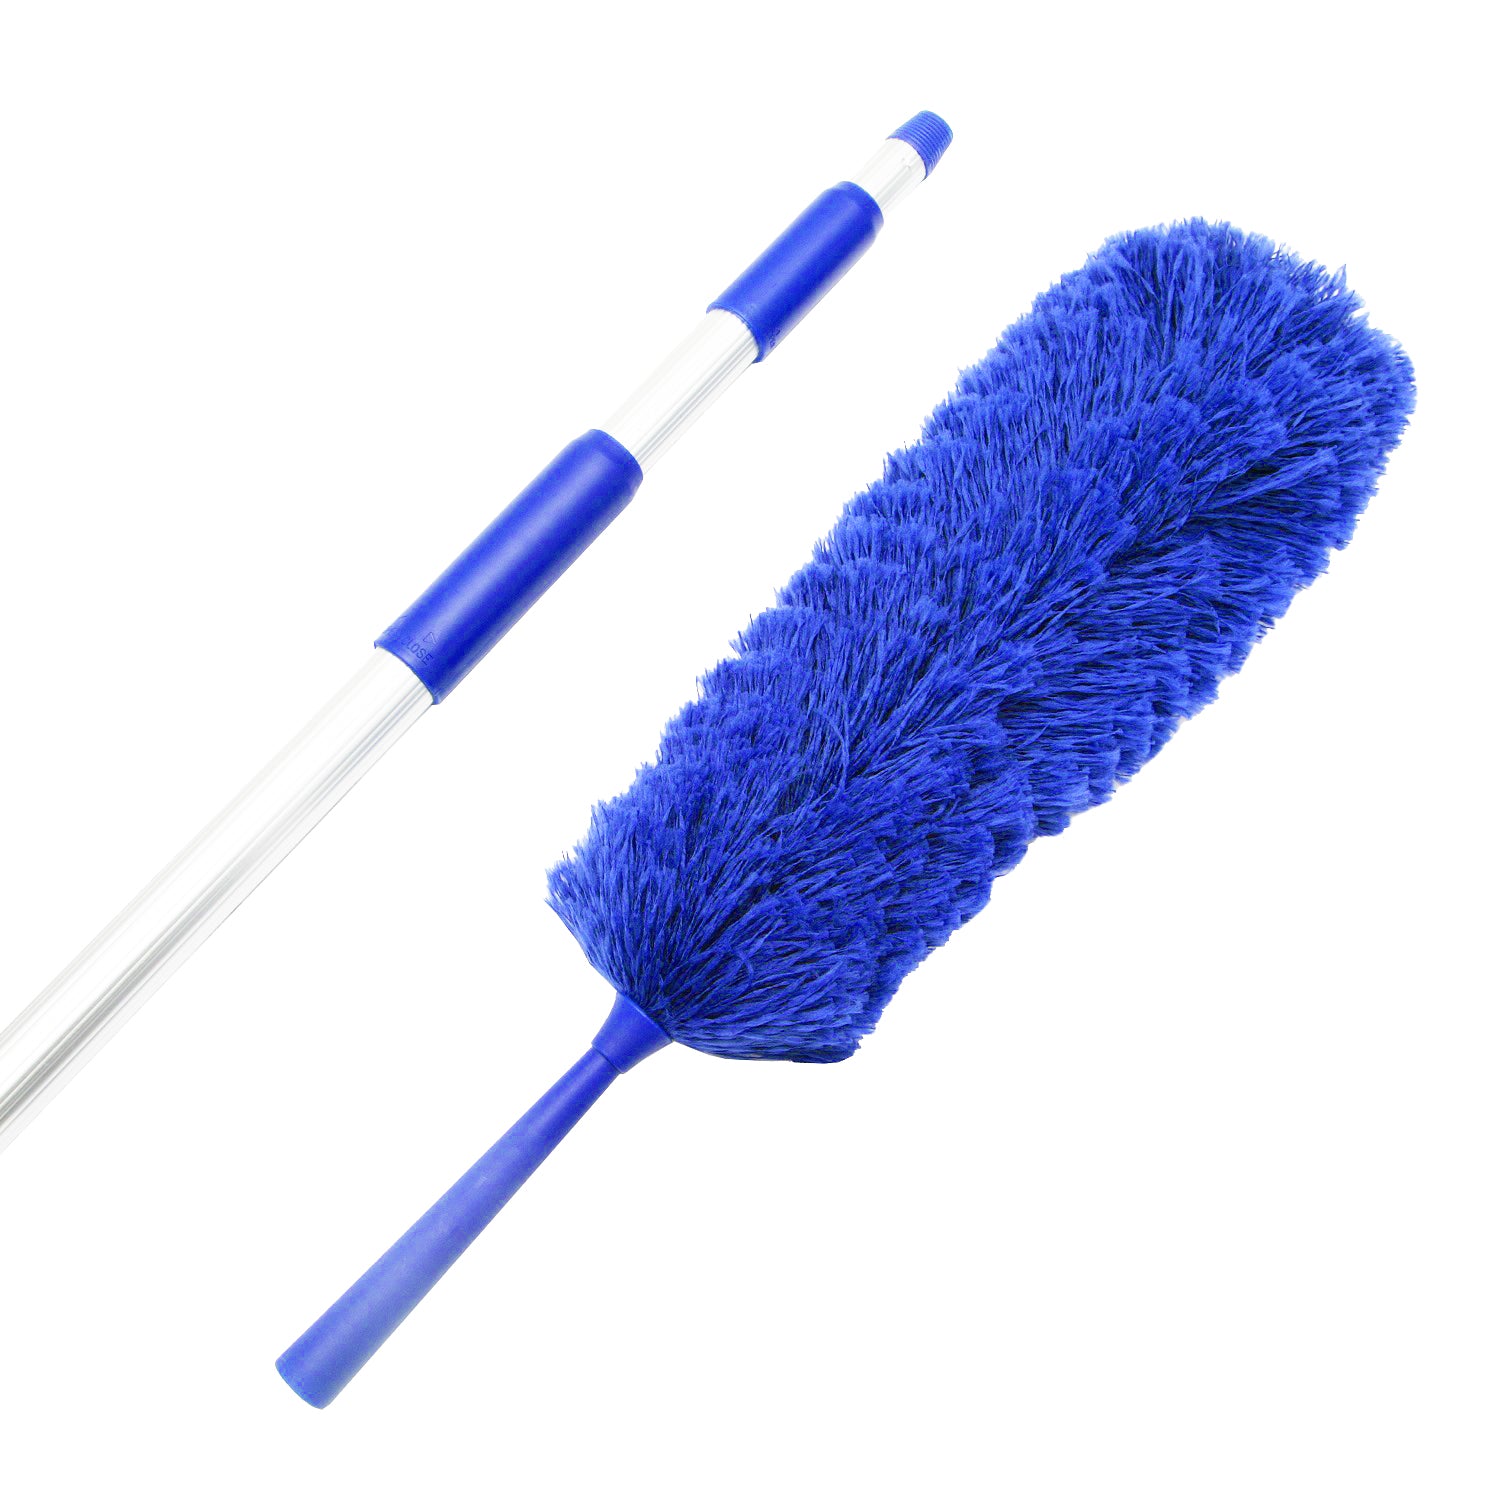 Extension Rod & Blue Extension Duster, Extend 18-20 feet - Touch Of Oranges